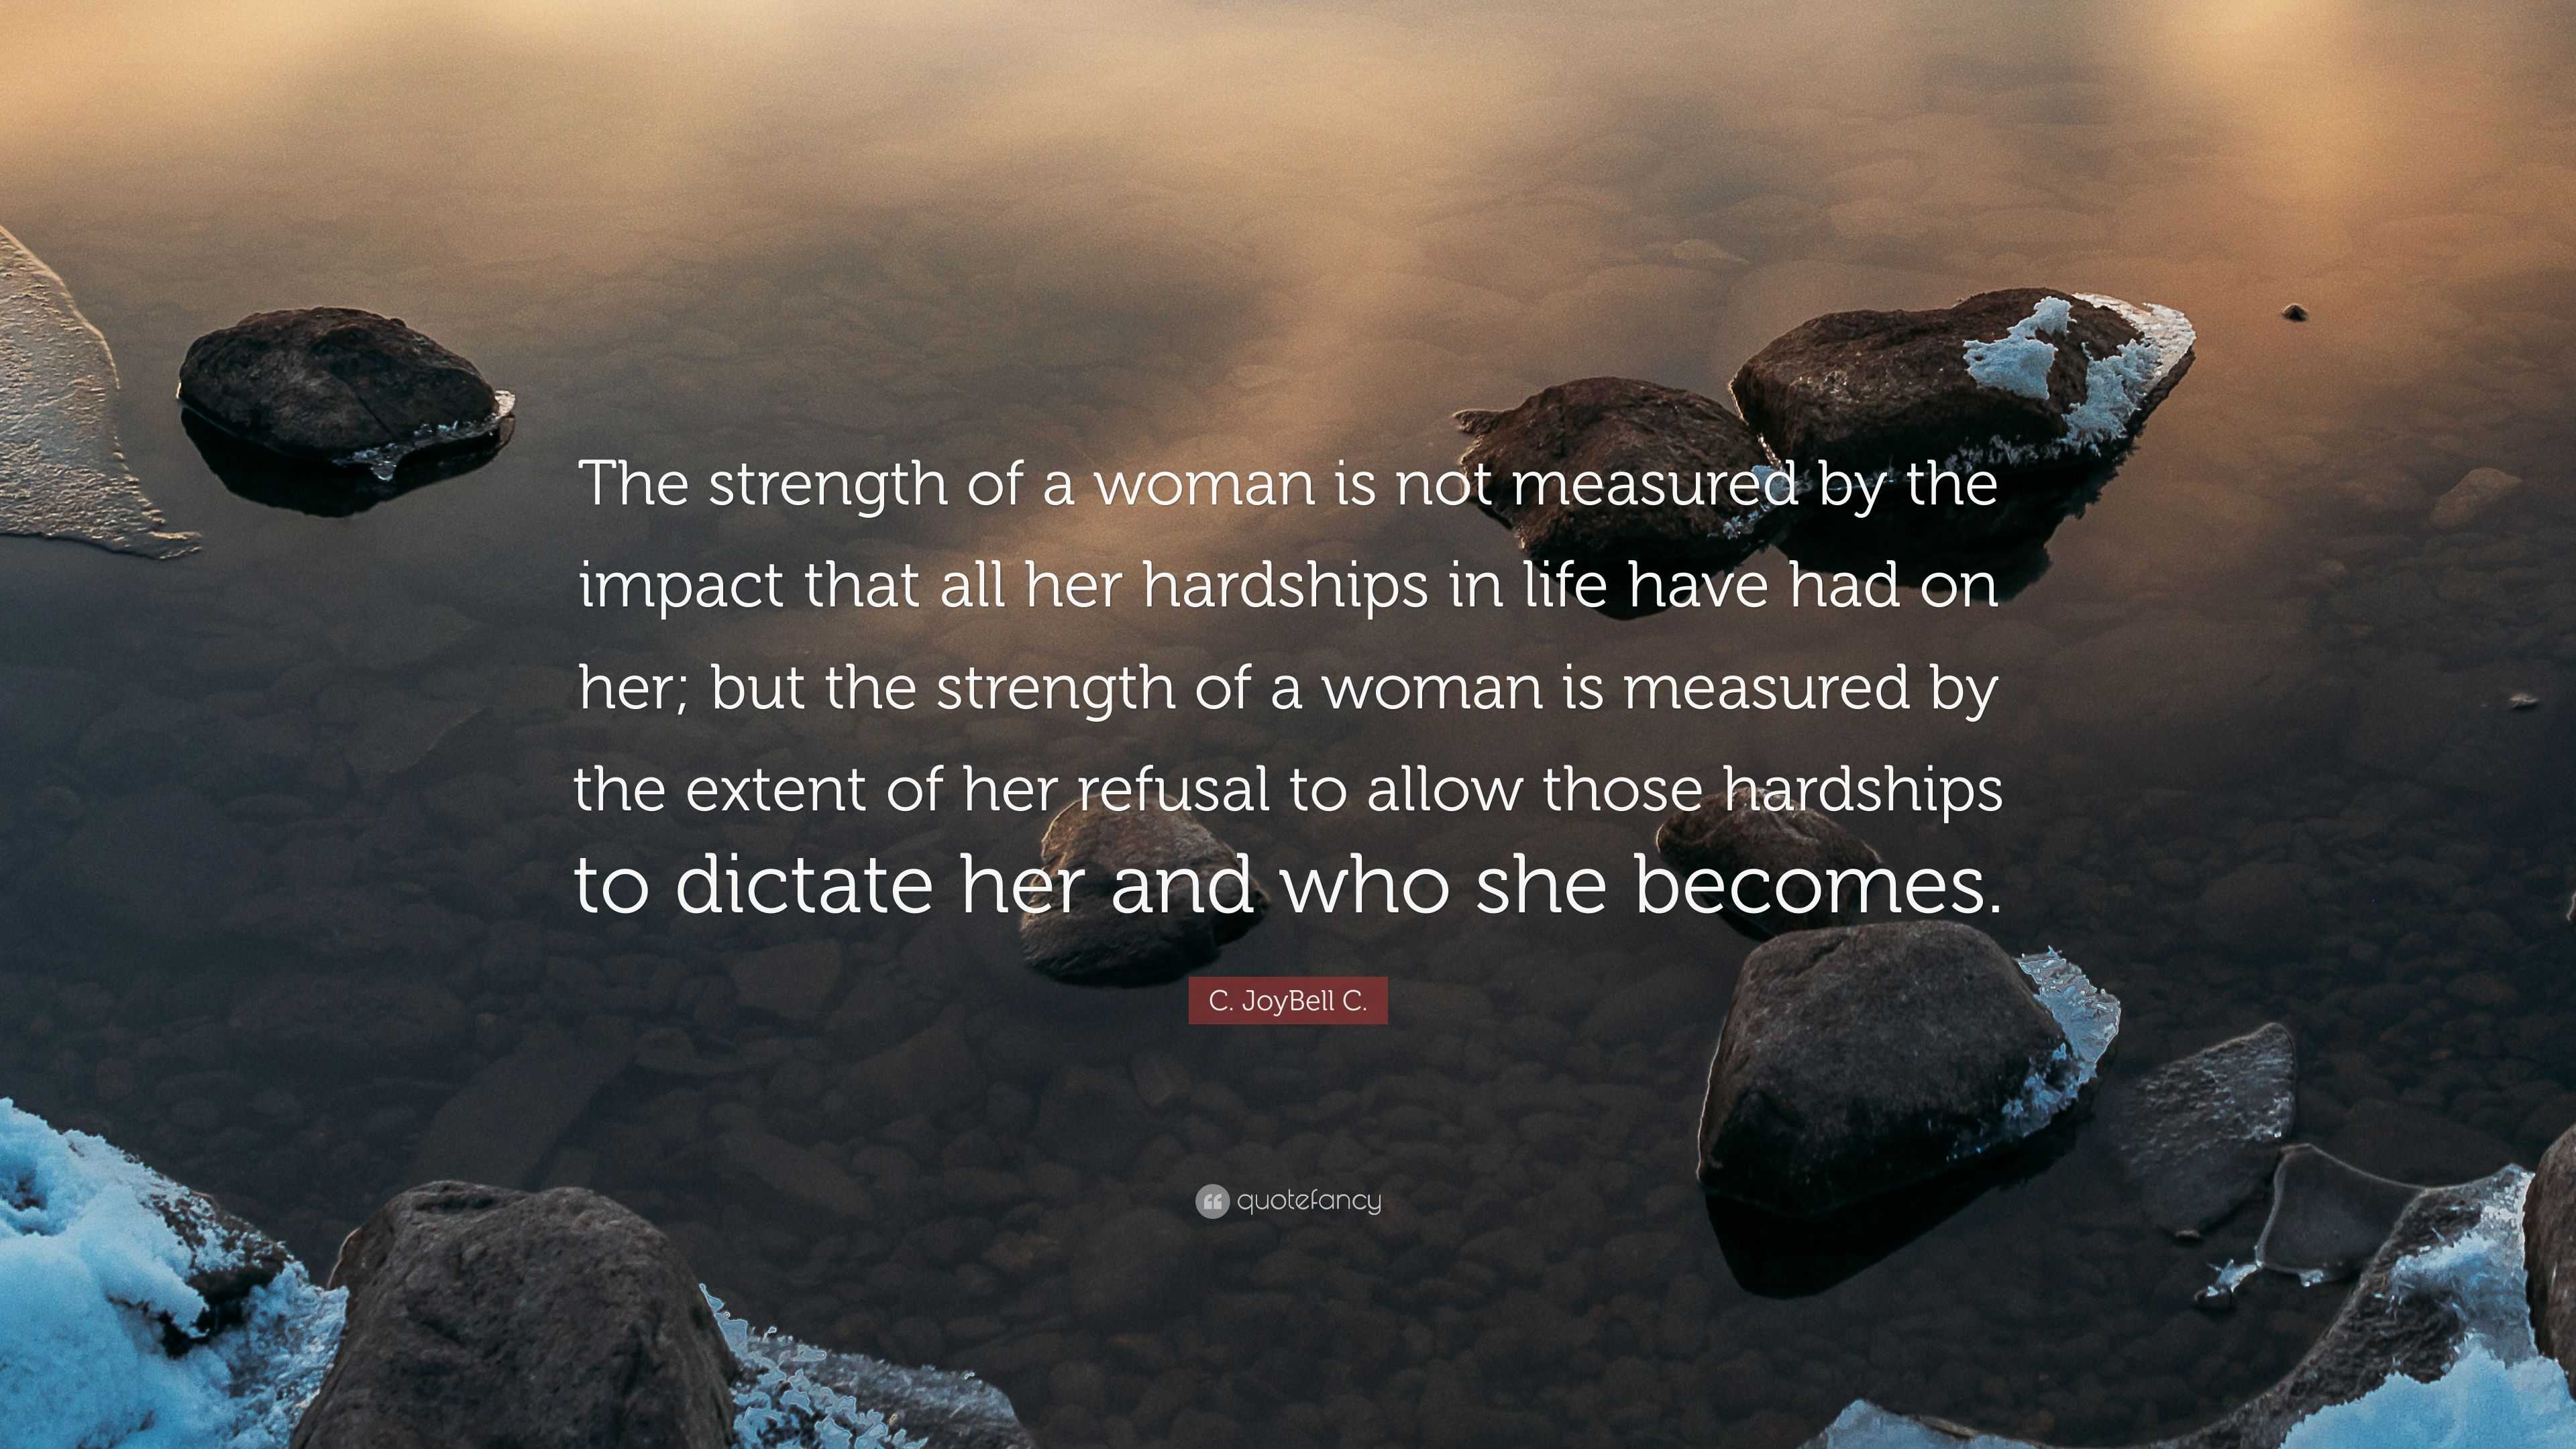 C. JoyBell C. Quote: “The strength of a woman is not measured by the impact  that all her hardships in life have had on her; but the strength o”